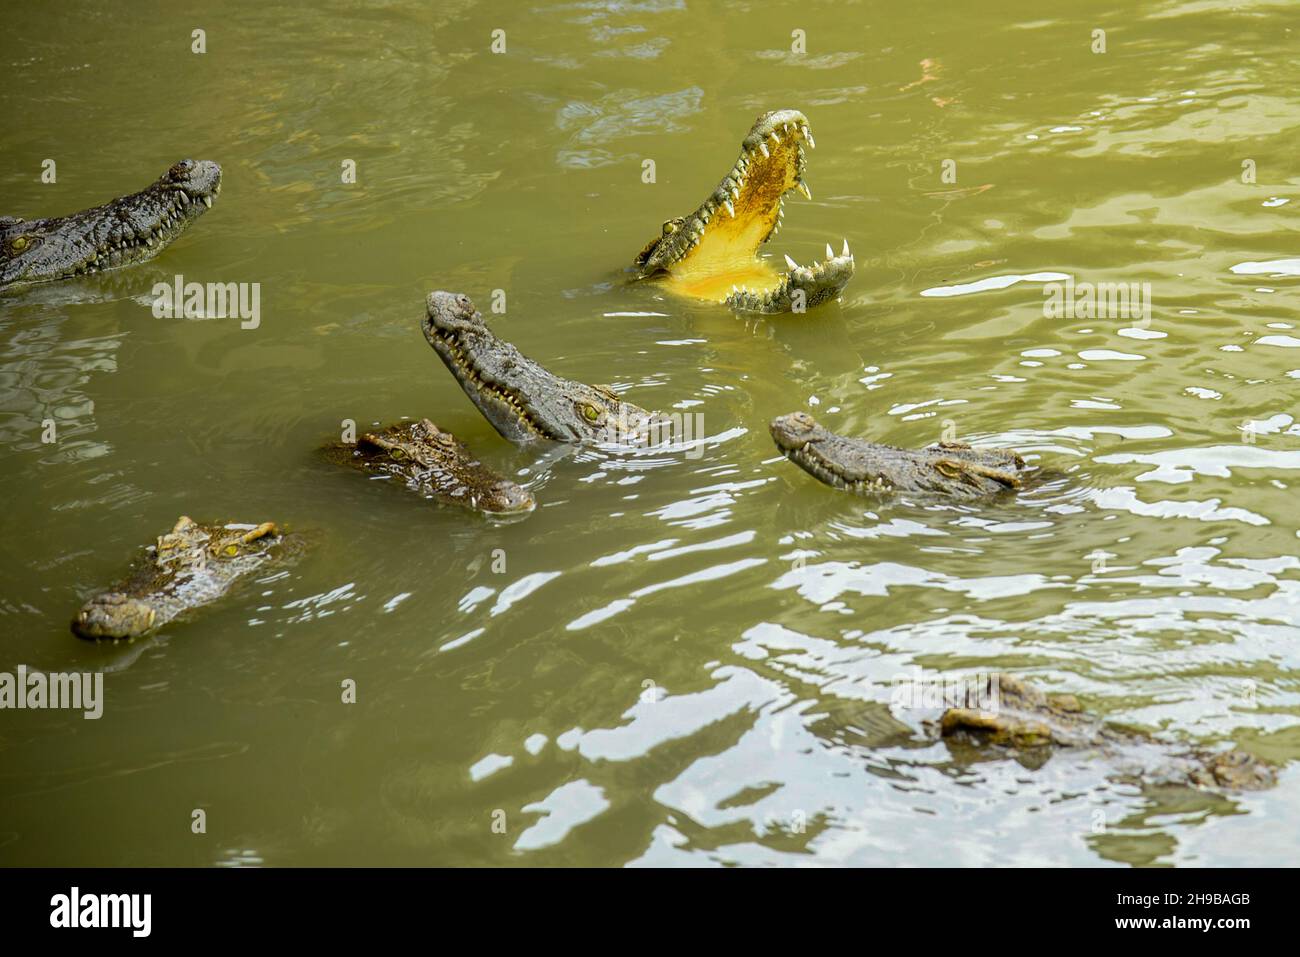 Portrait of hungry crocodile baring fierce teeth in the park Stock Photo